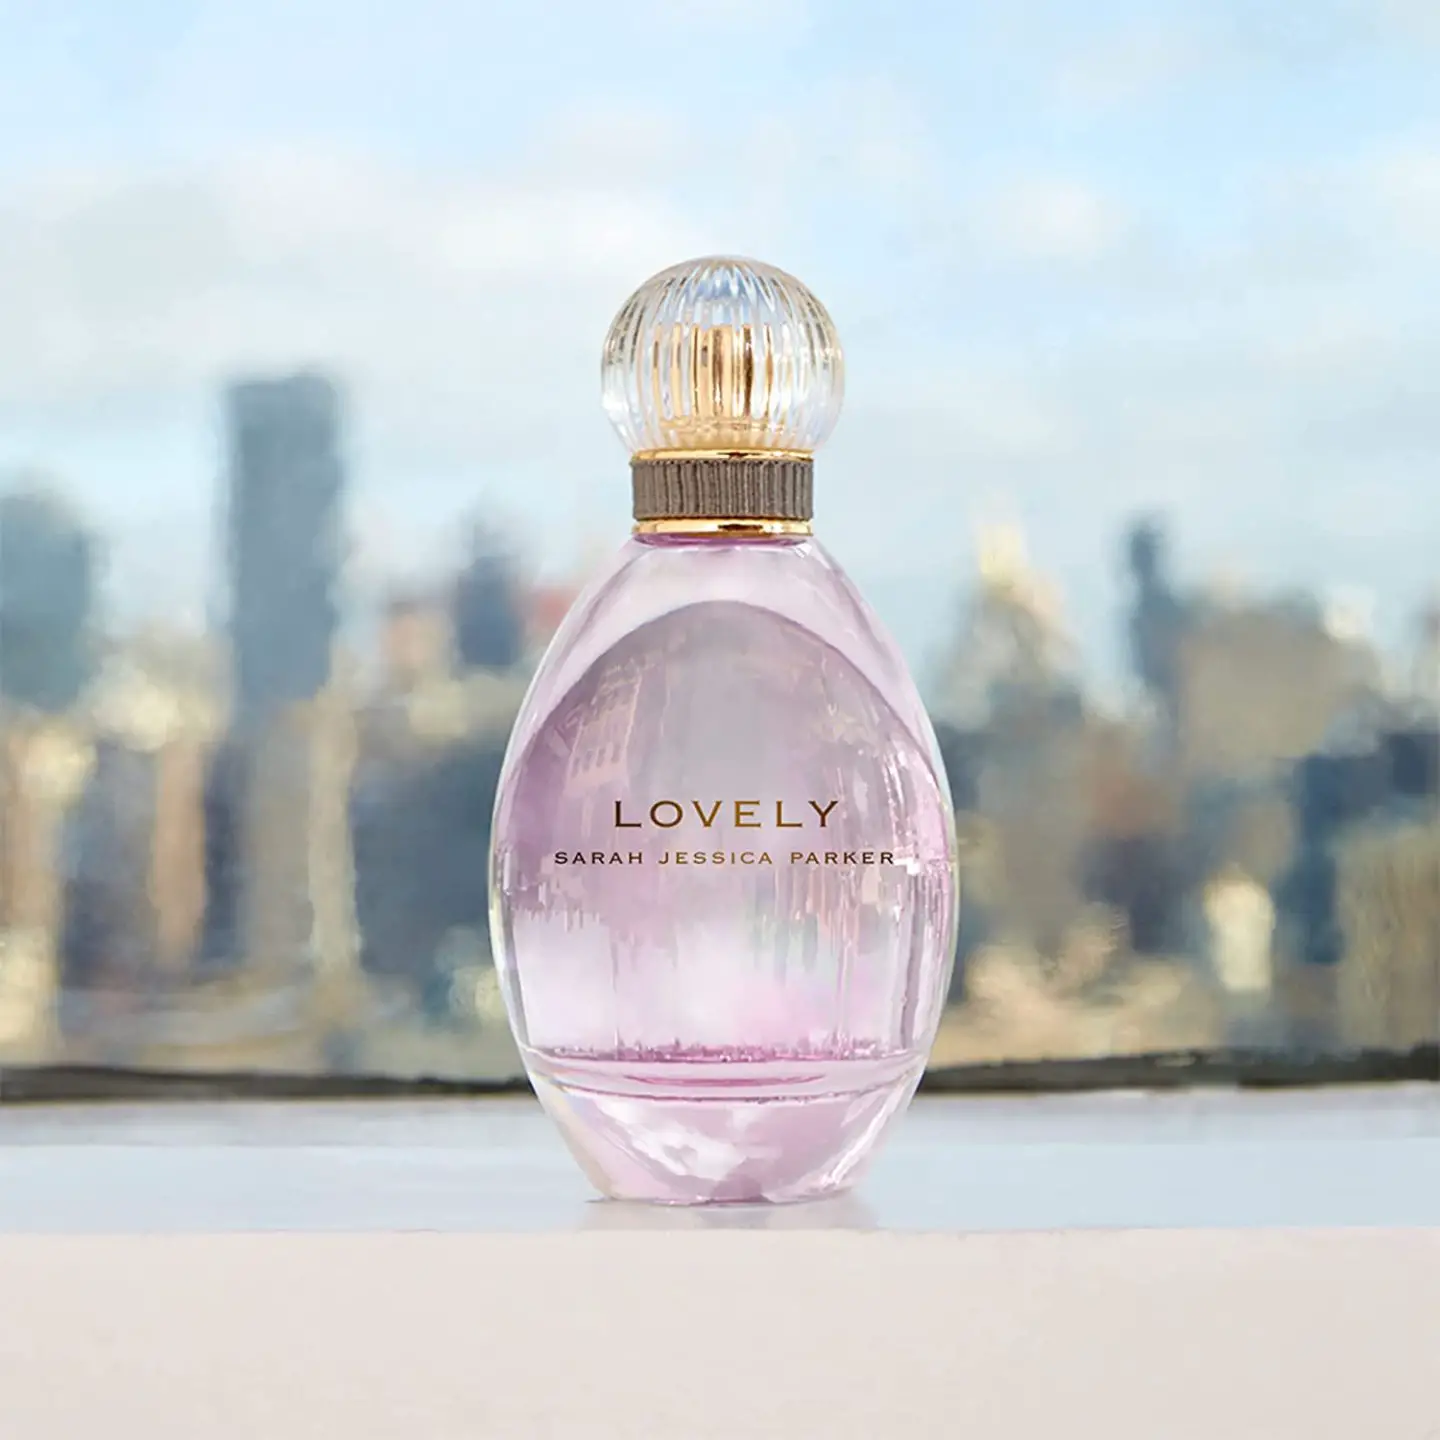 Sarah Jessica Parker Lovely Perfume Range Review
Gift Guide: Top 10 Mother's Day Perfumes 2023